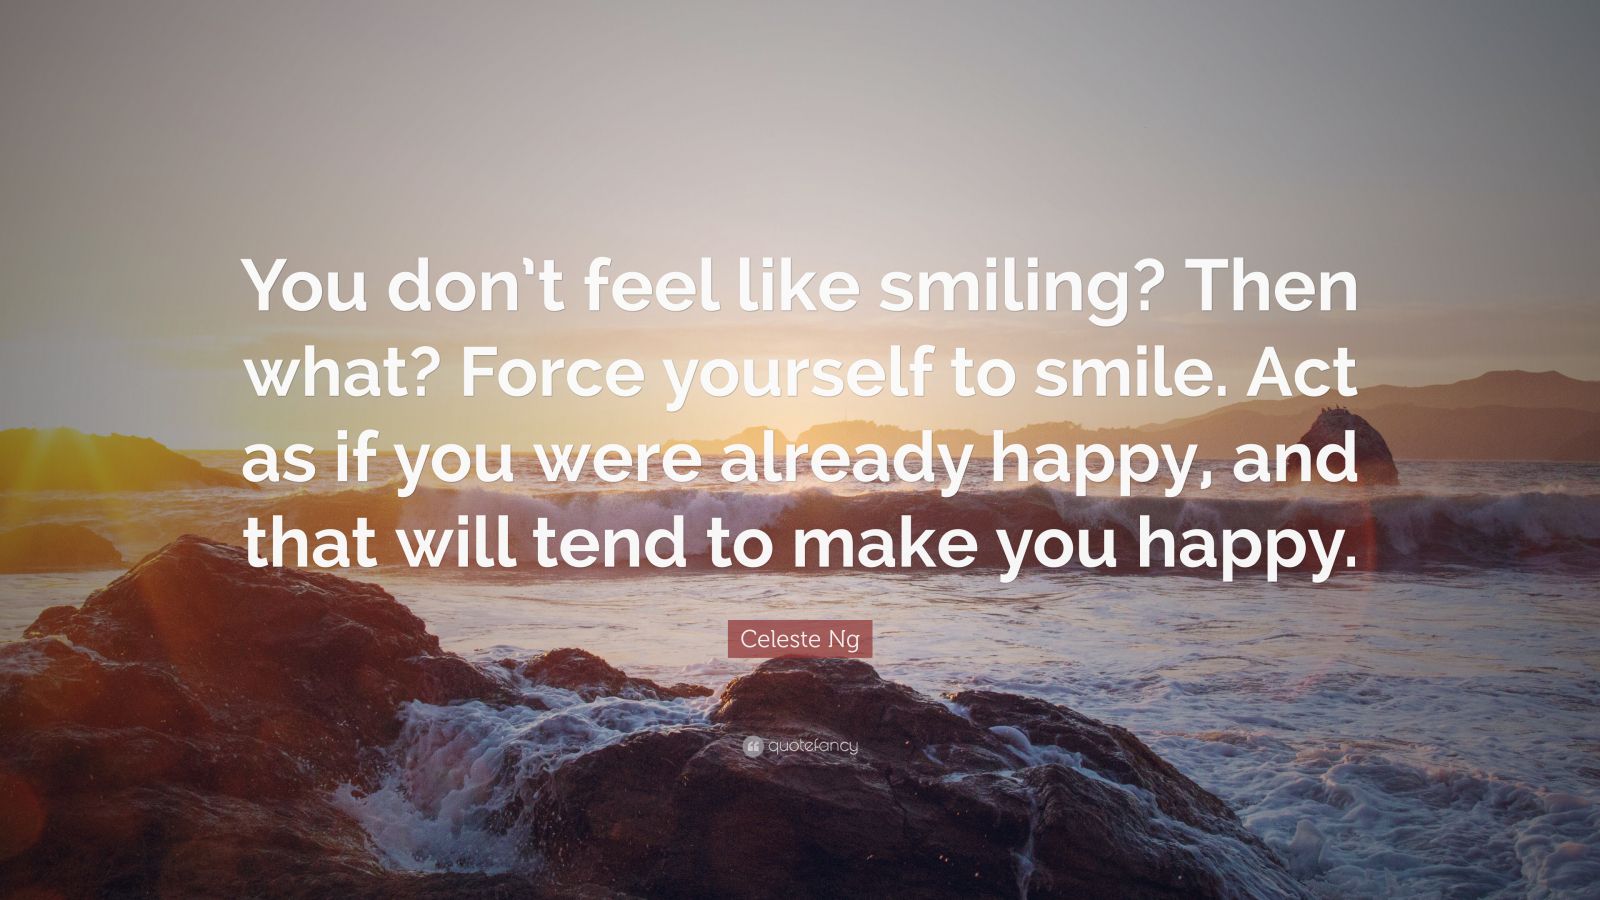 Celeste Ng Quote: “You don’t feel like smiling? Then what? Force ...